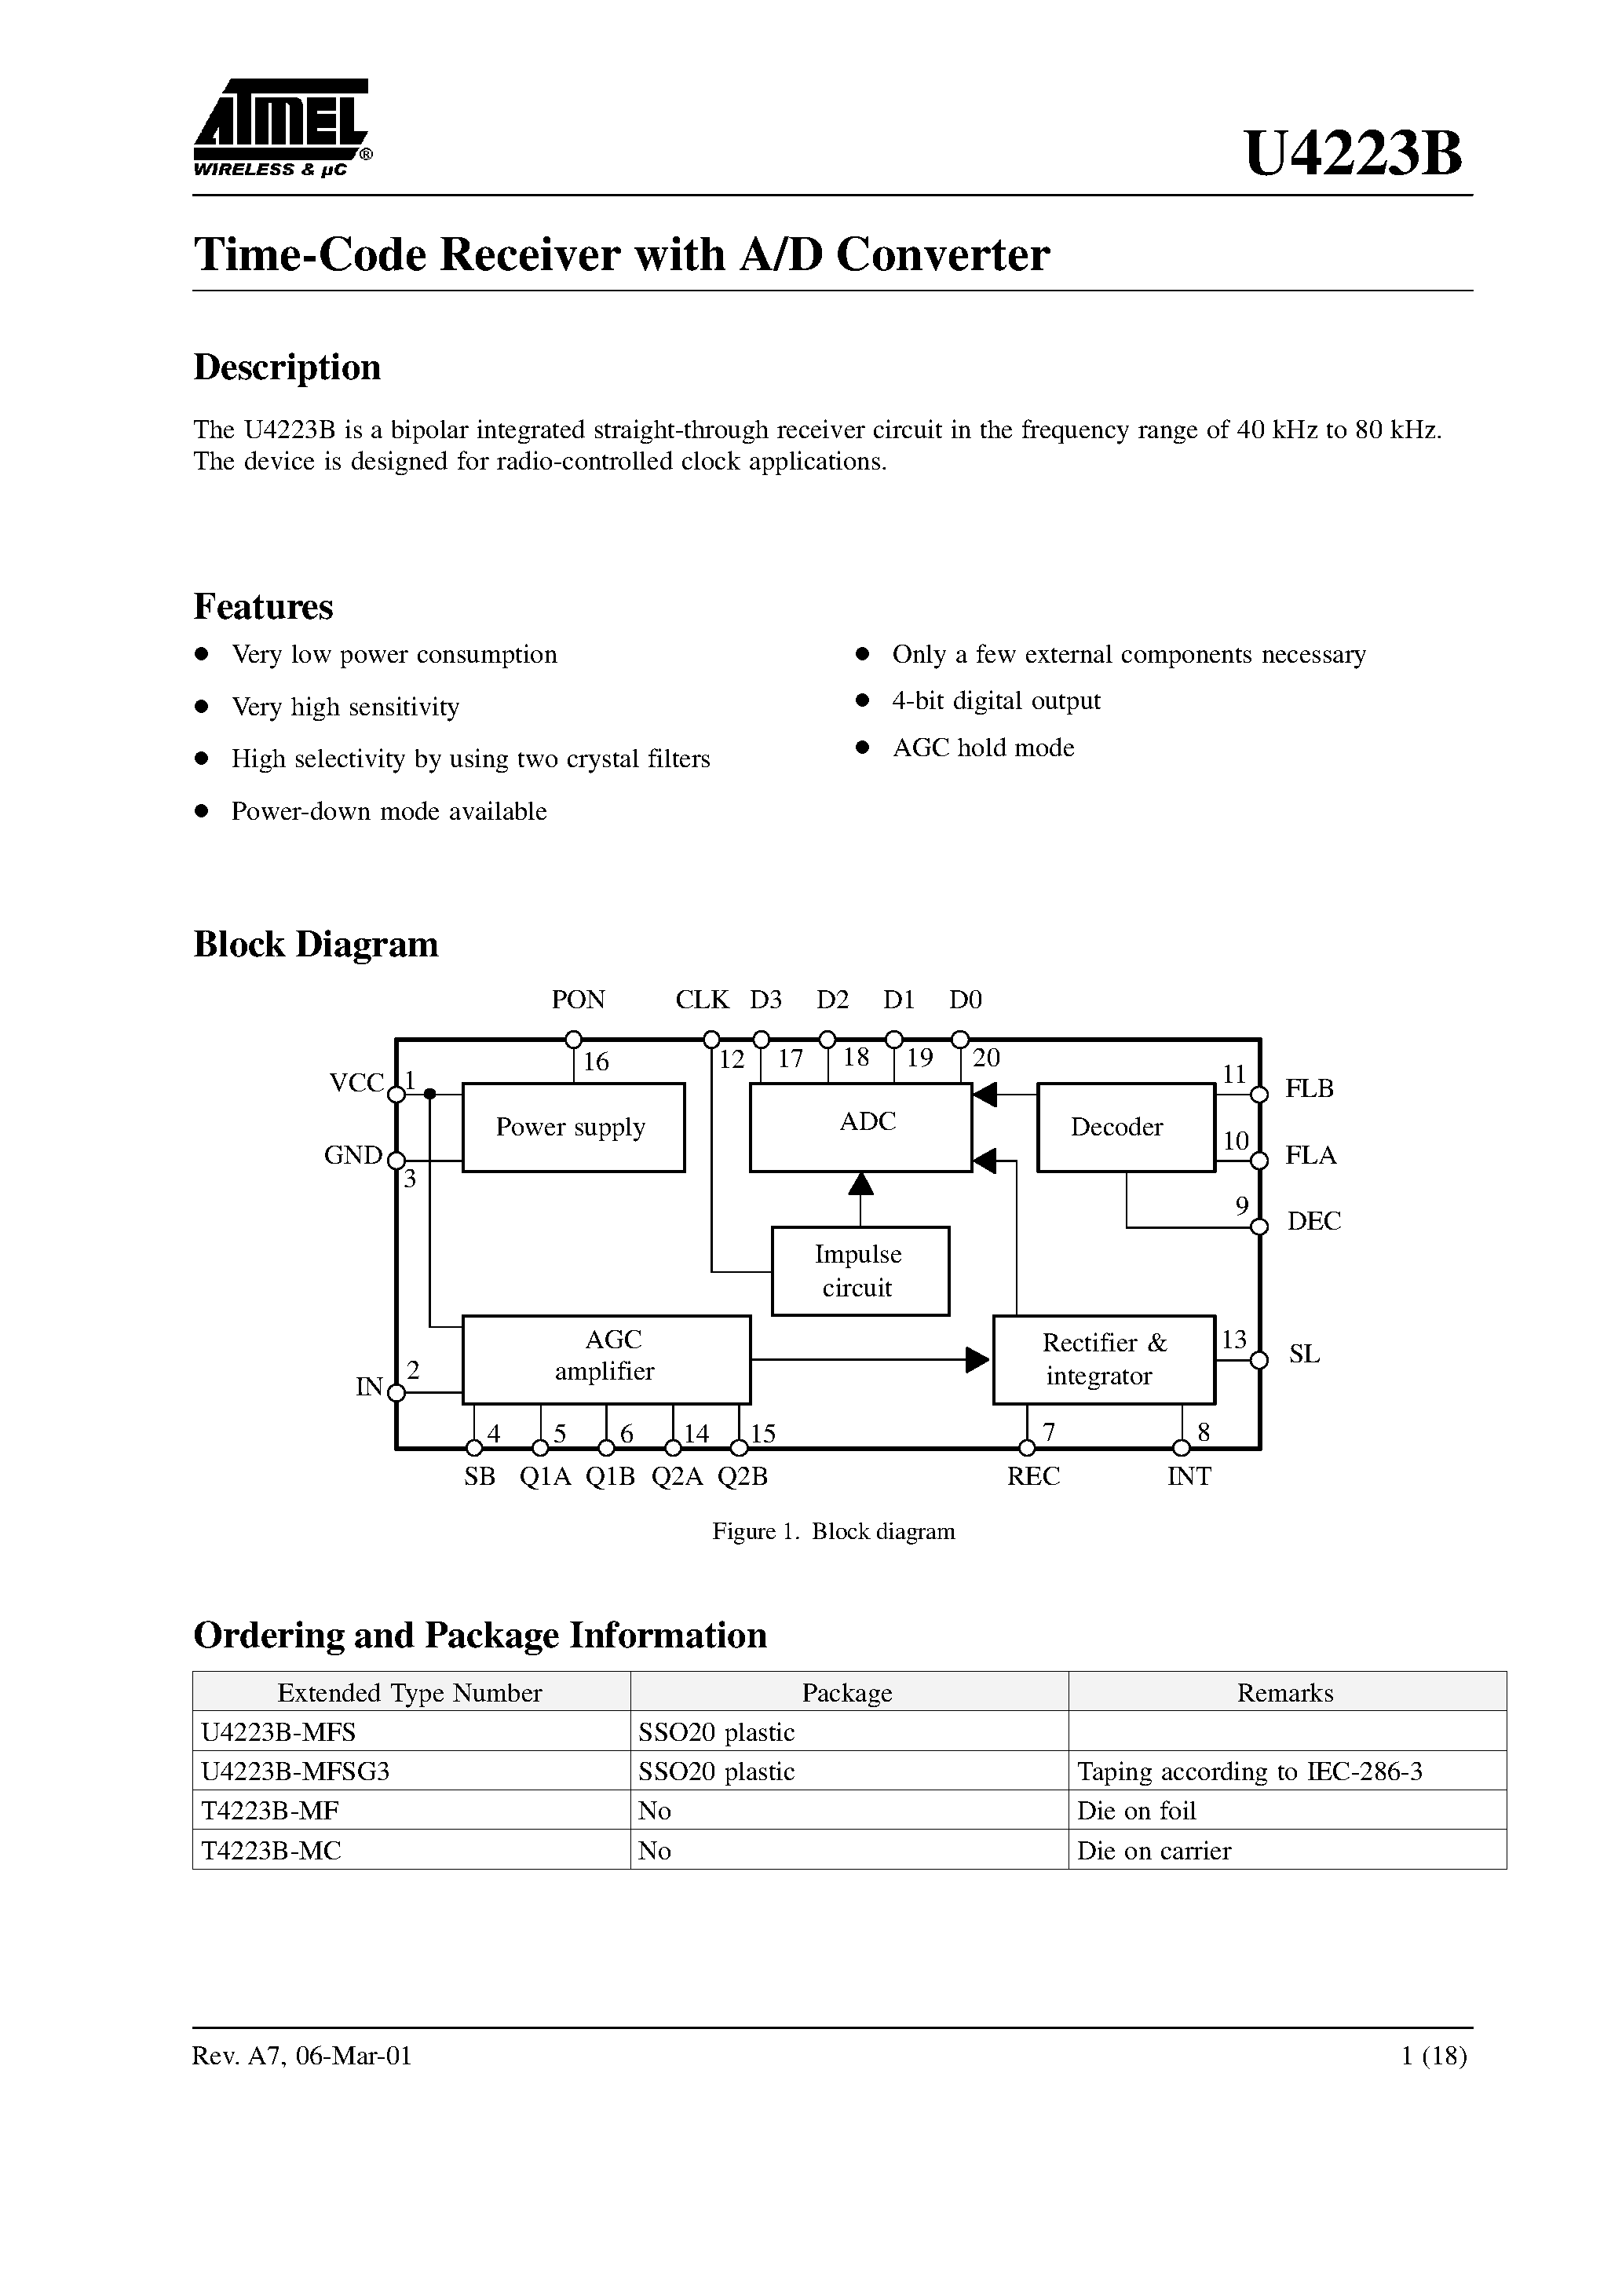 Datasheet U4223B-MFS - Time-Code Receiver with A/D Converter page 1